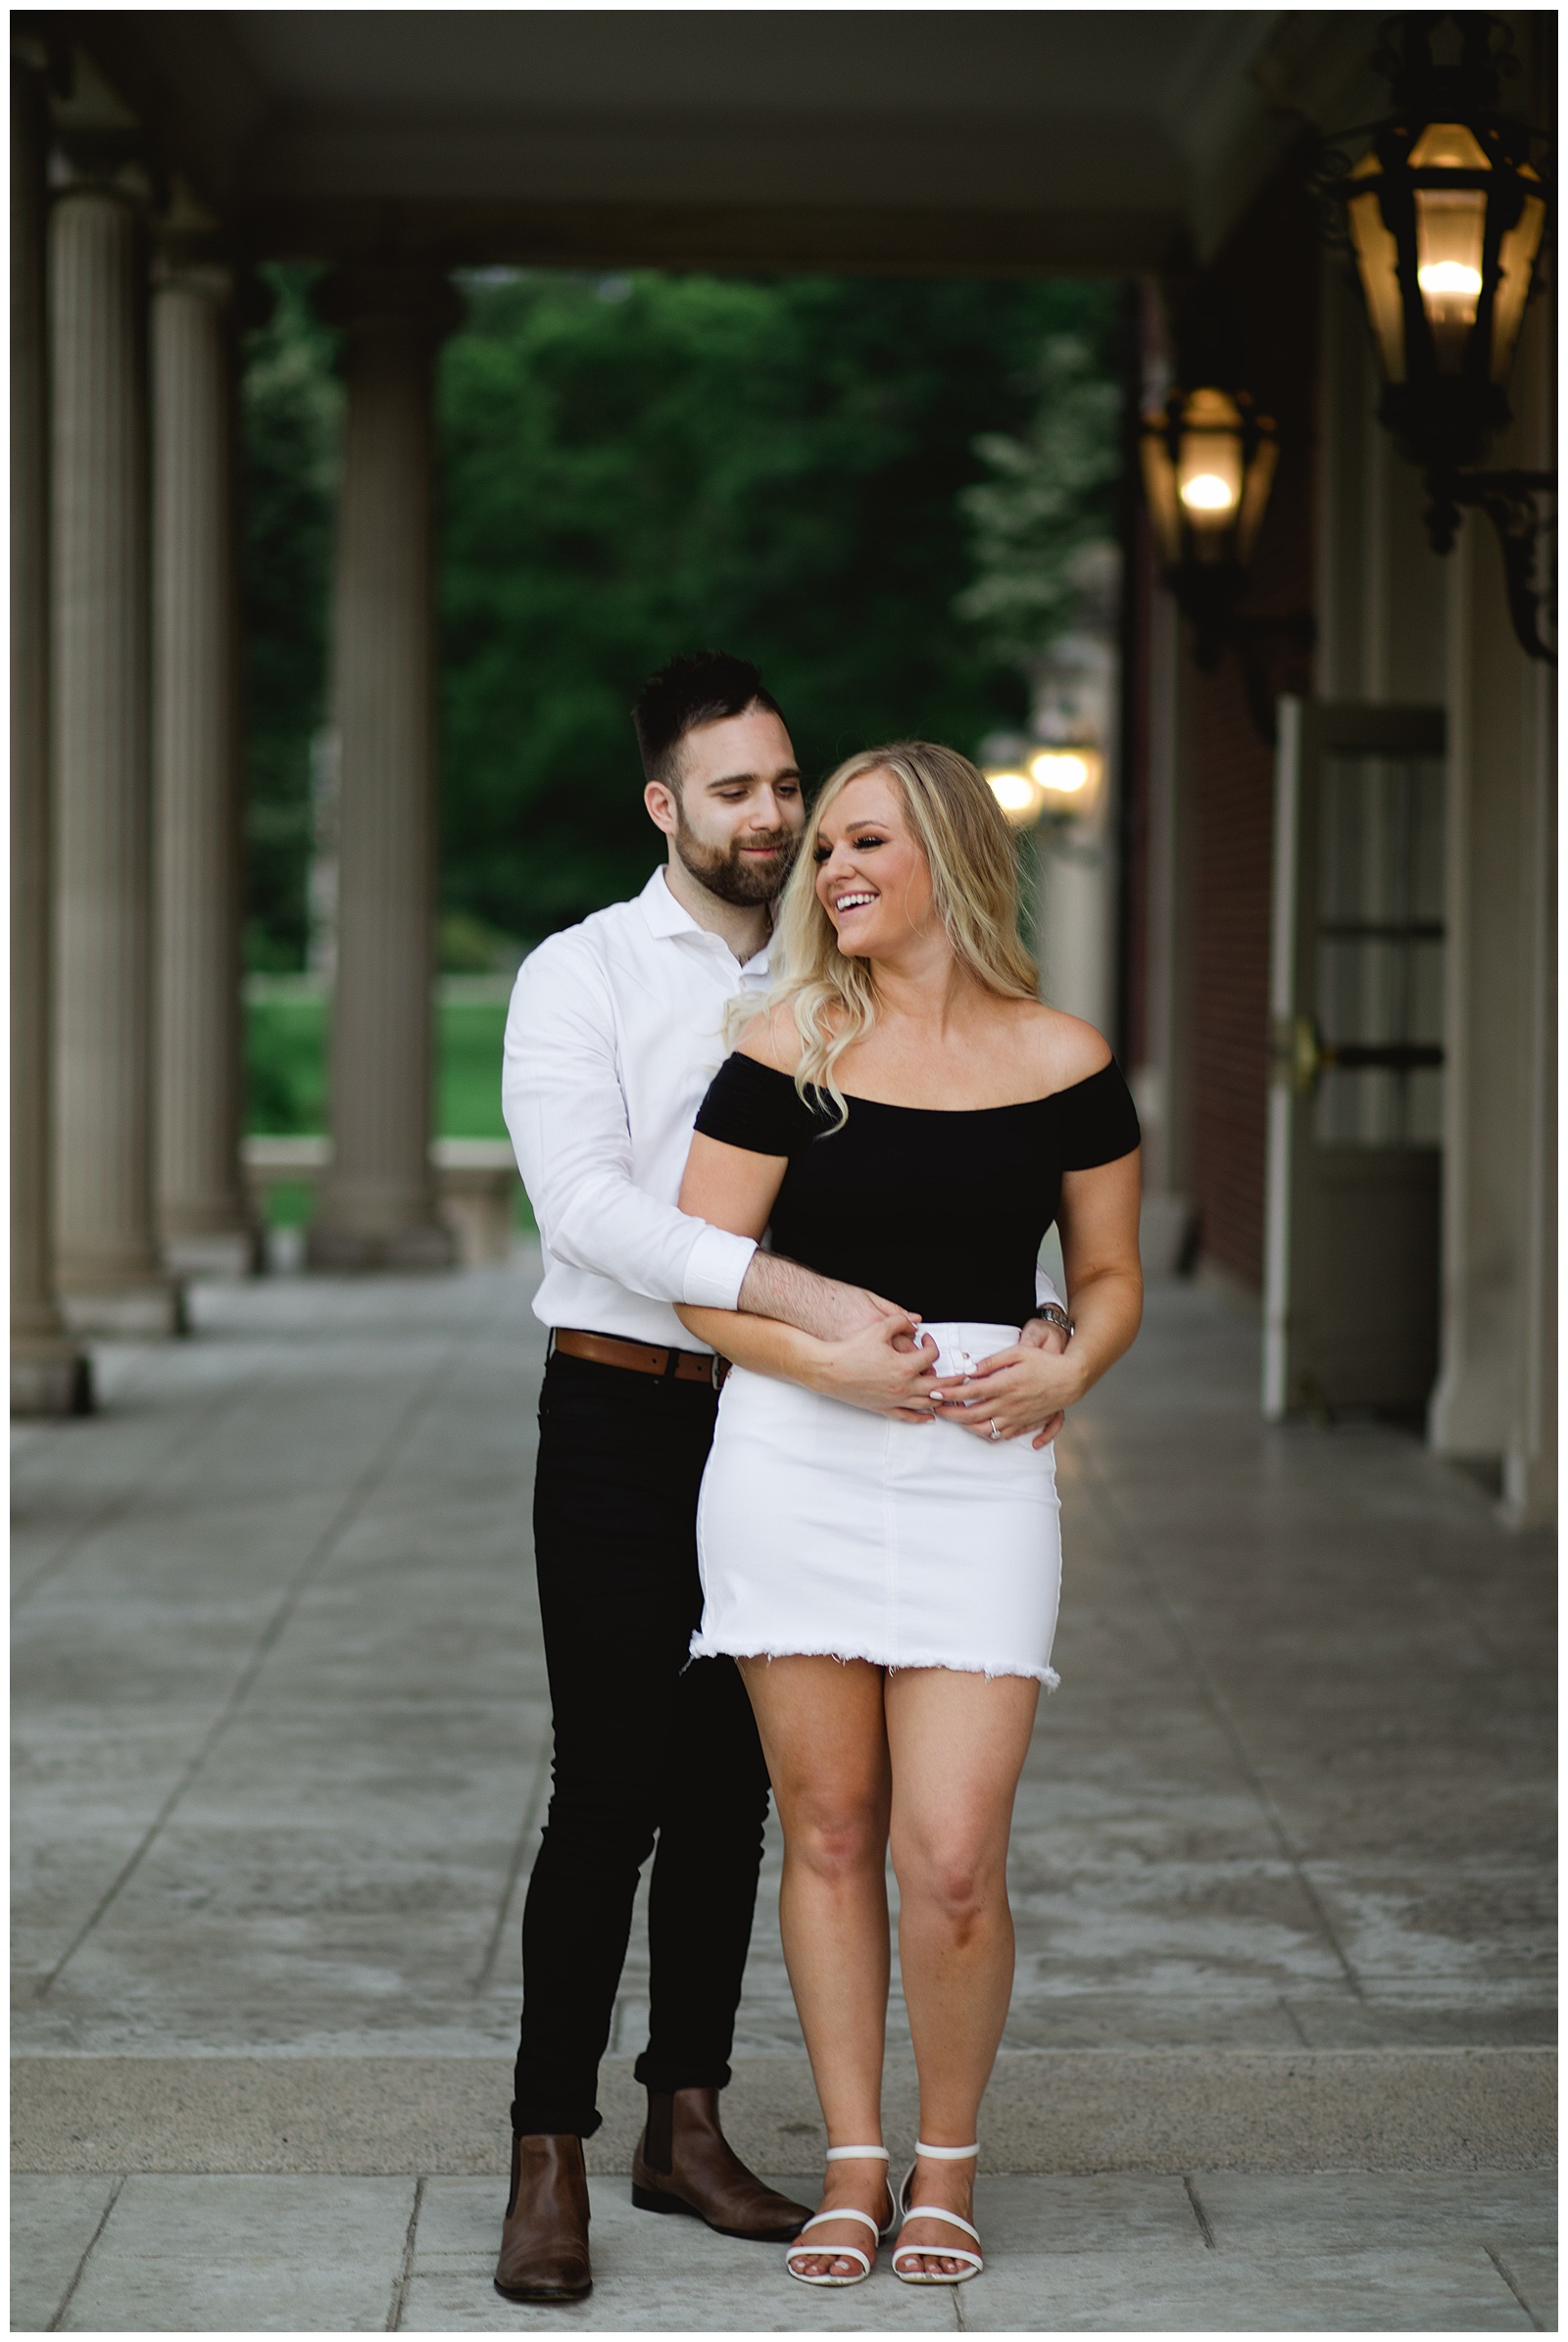 new jersey photographer fairleigh dickinson university fairleigh dickinson engagement session fairleigh dickinson wedding madison new jersey champagne engagement session 